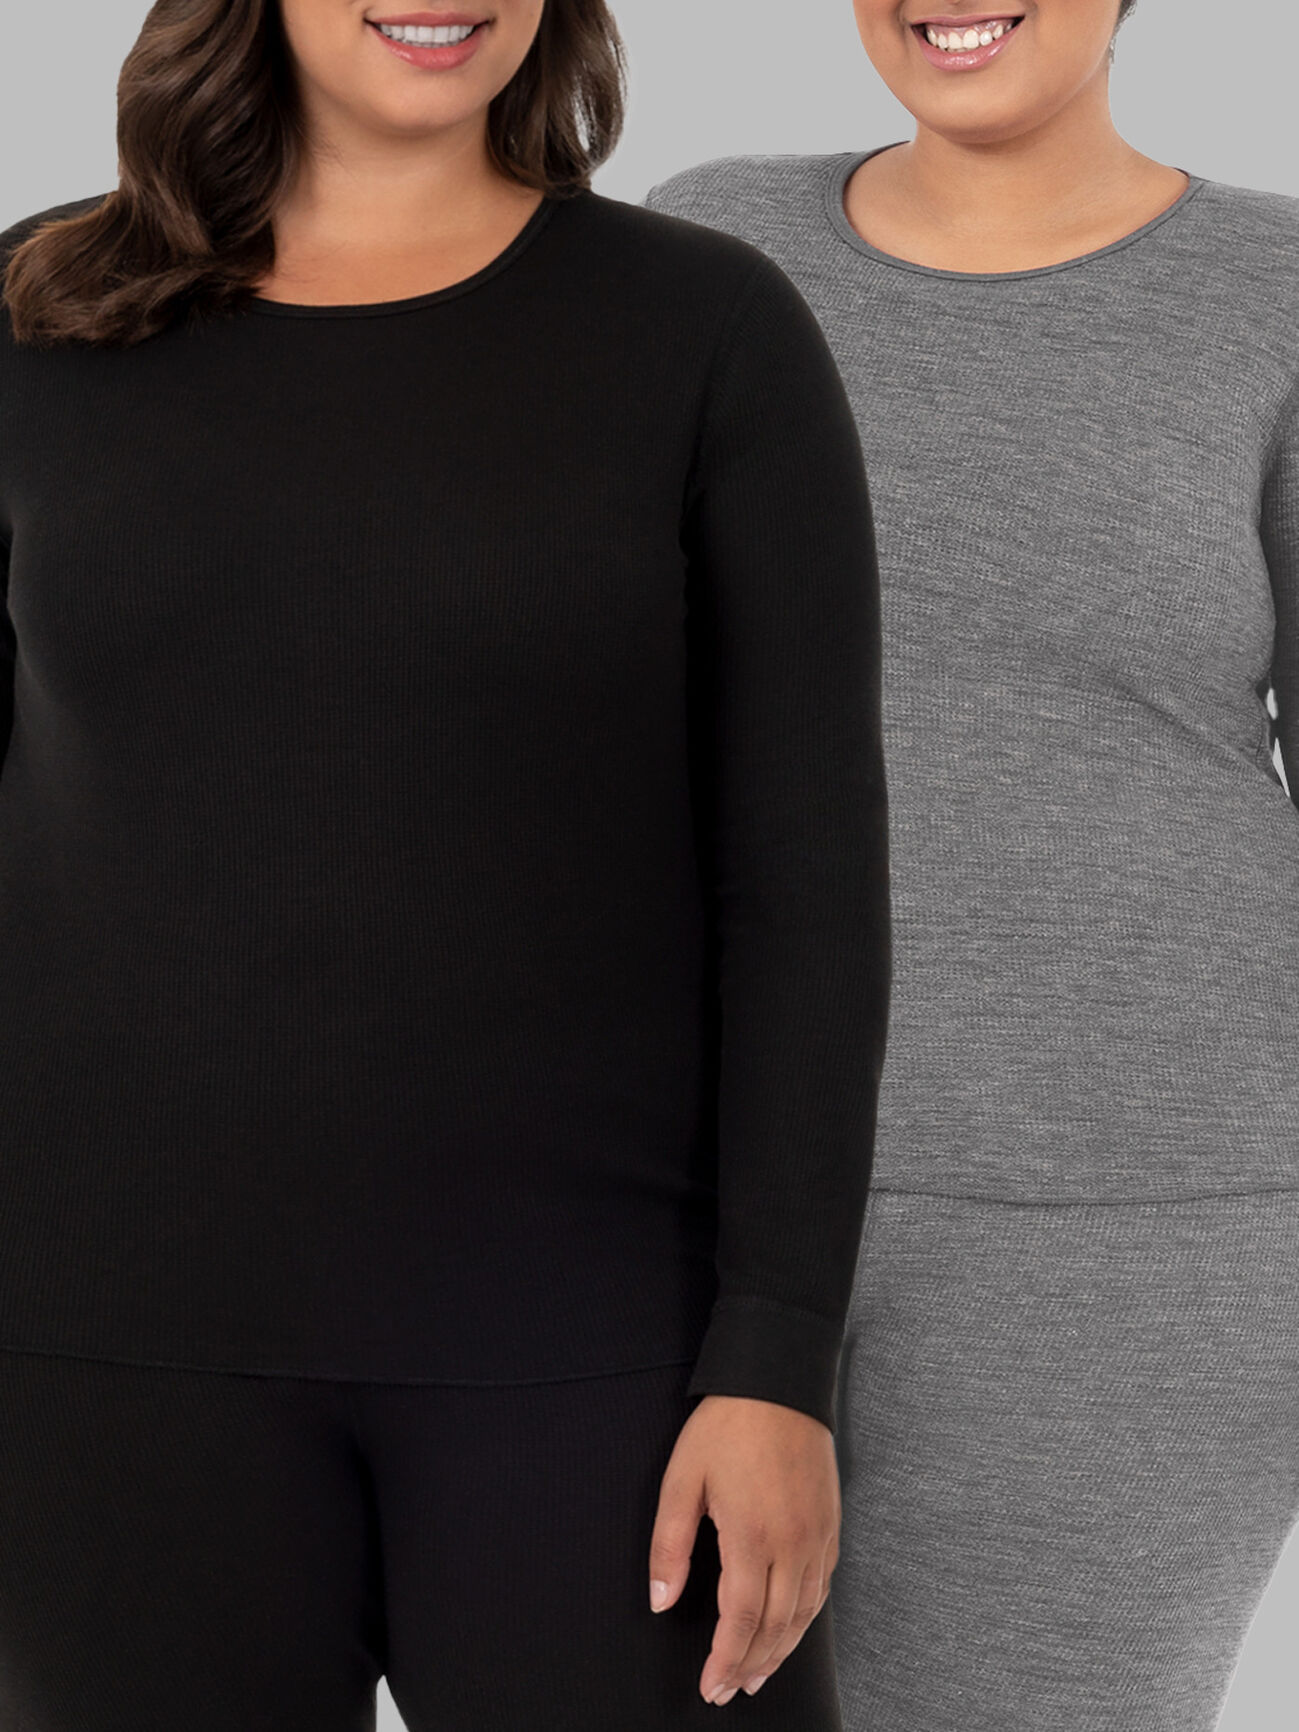 Women's Plus Size Crew Neck Waffle Thermal Top, 2 Pack BLACK/SMOKE INJECTION HEATHER